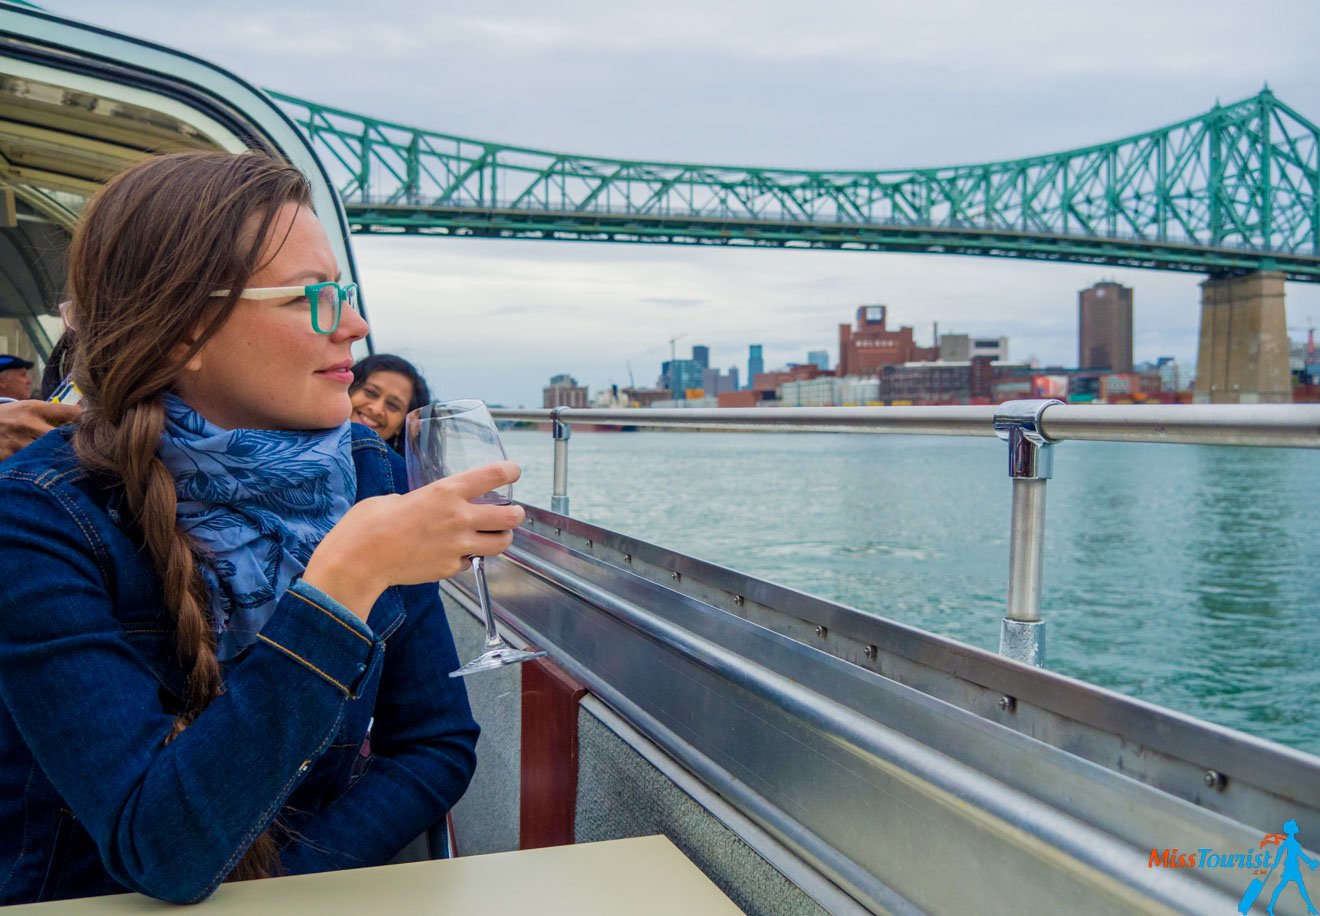 The writer of the post, Yulia, in blue attire and sunglasses holding a glass, gazing out over the water from a boat, with a green bridge and the Montreal skyline in the background